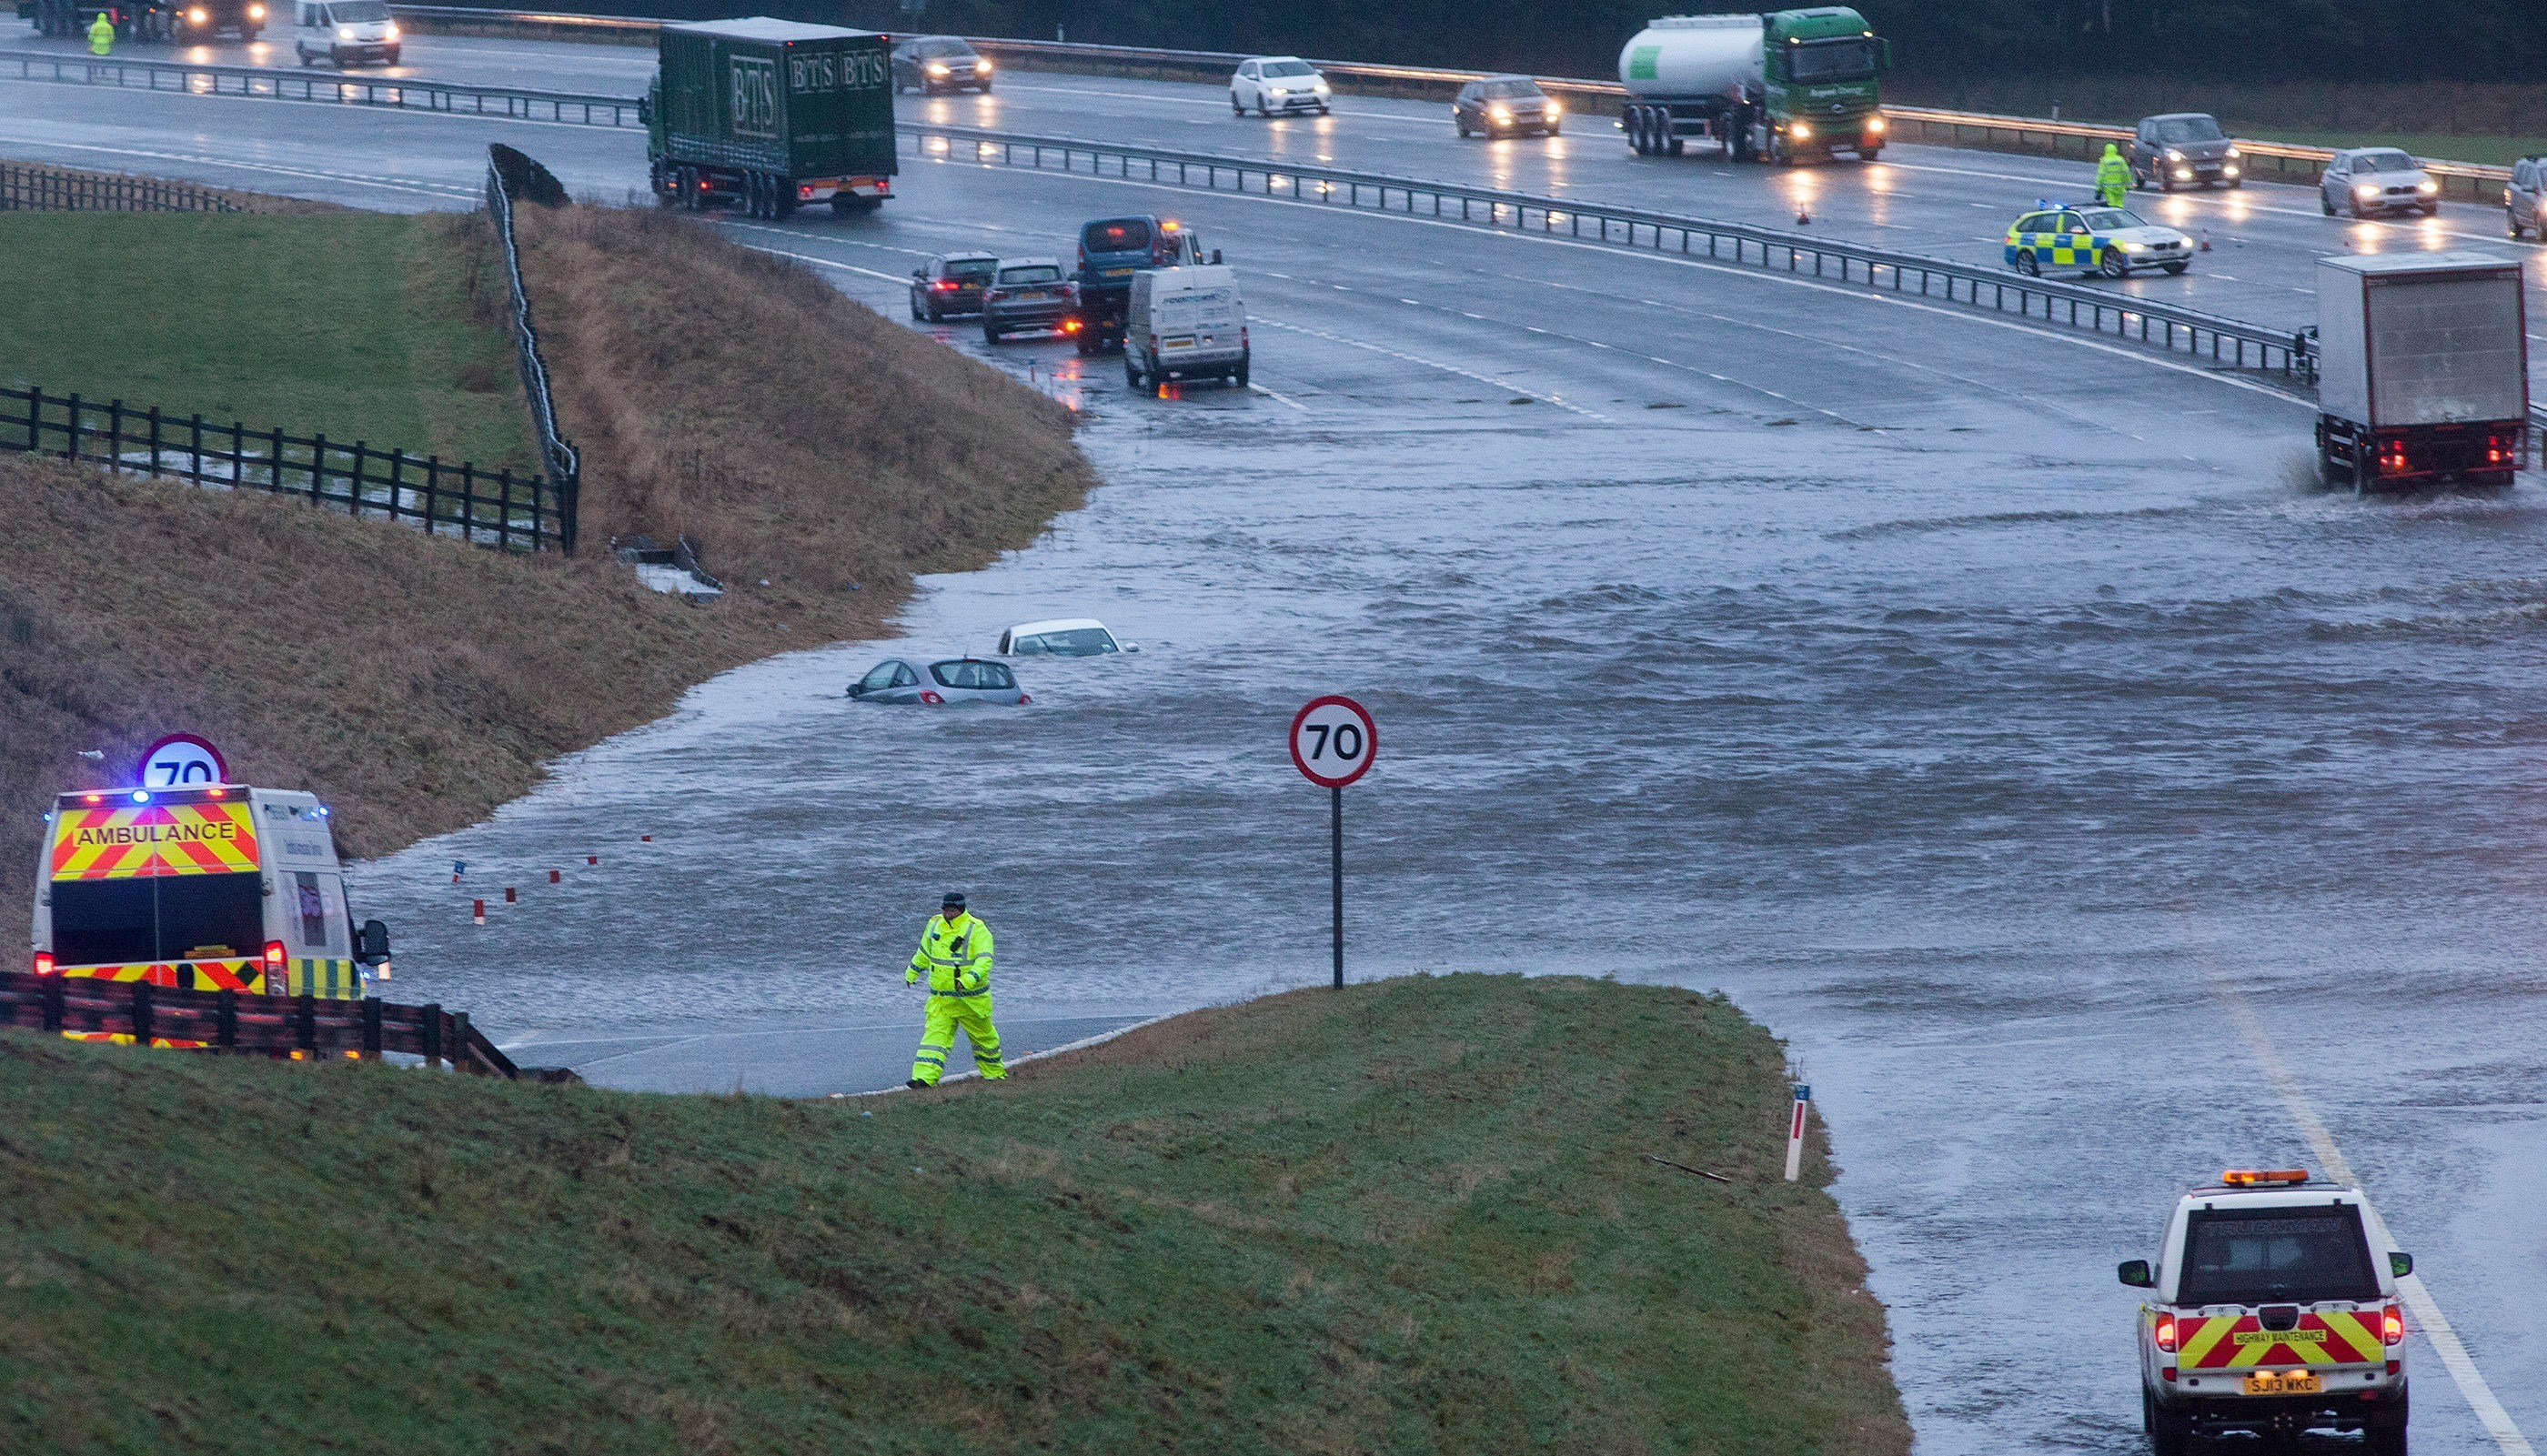 Flooding on the M74